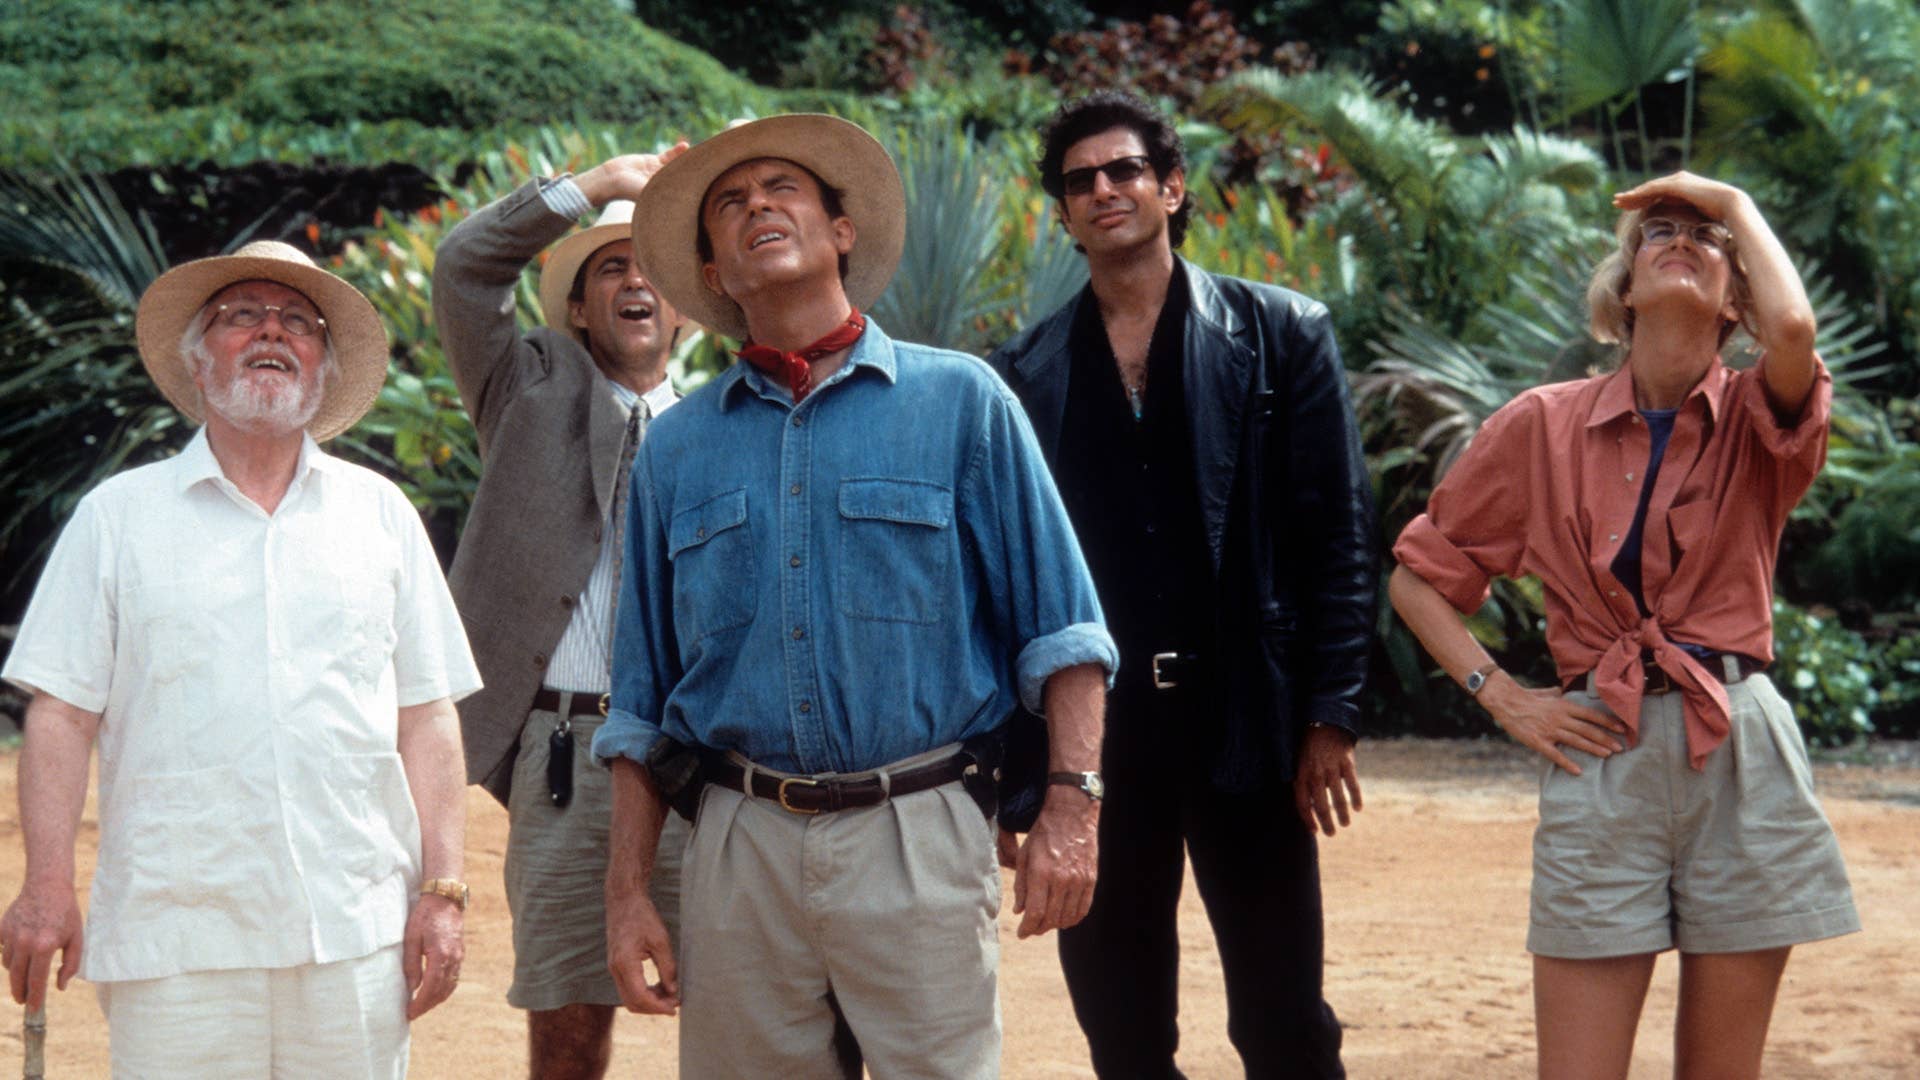 A scene from the film 'Jurassic Park.'